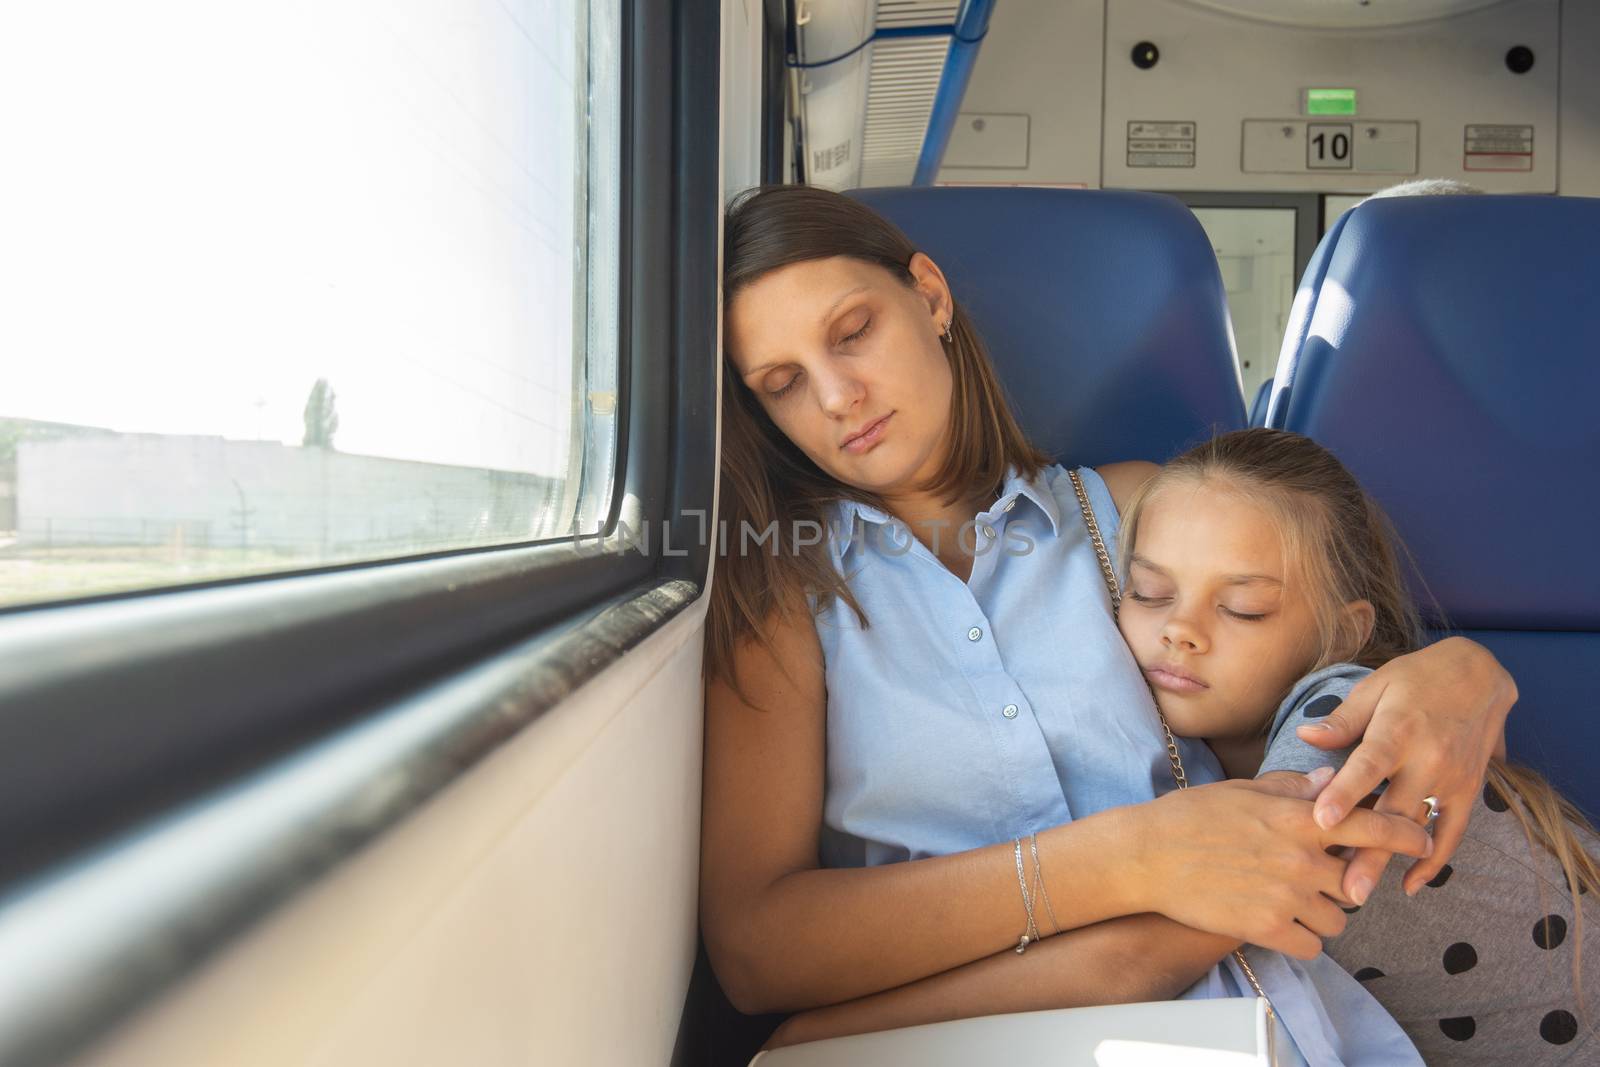 Mom and daughter hugging sleeping in a train car